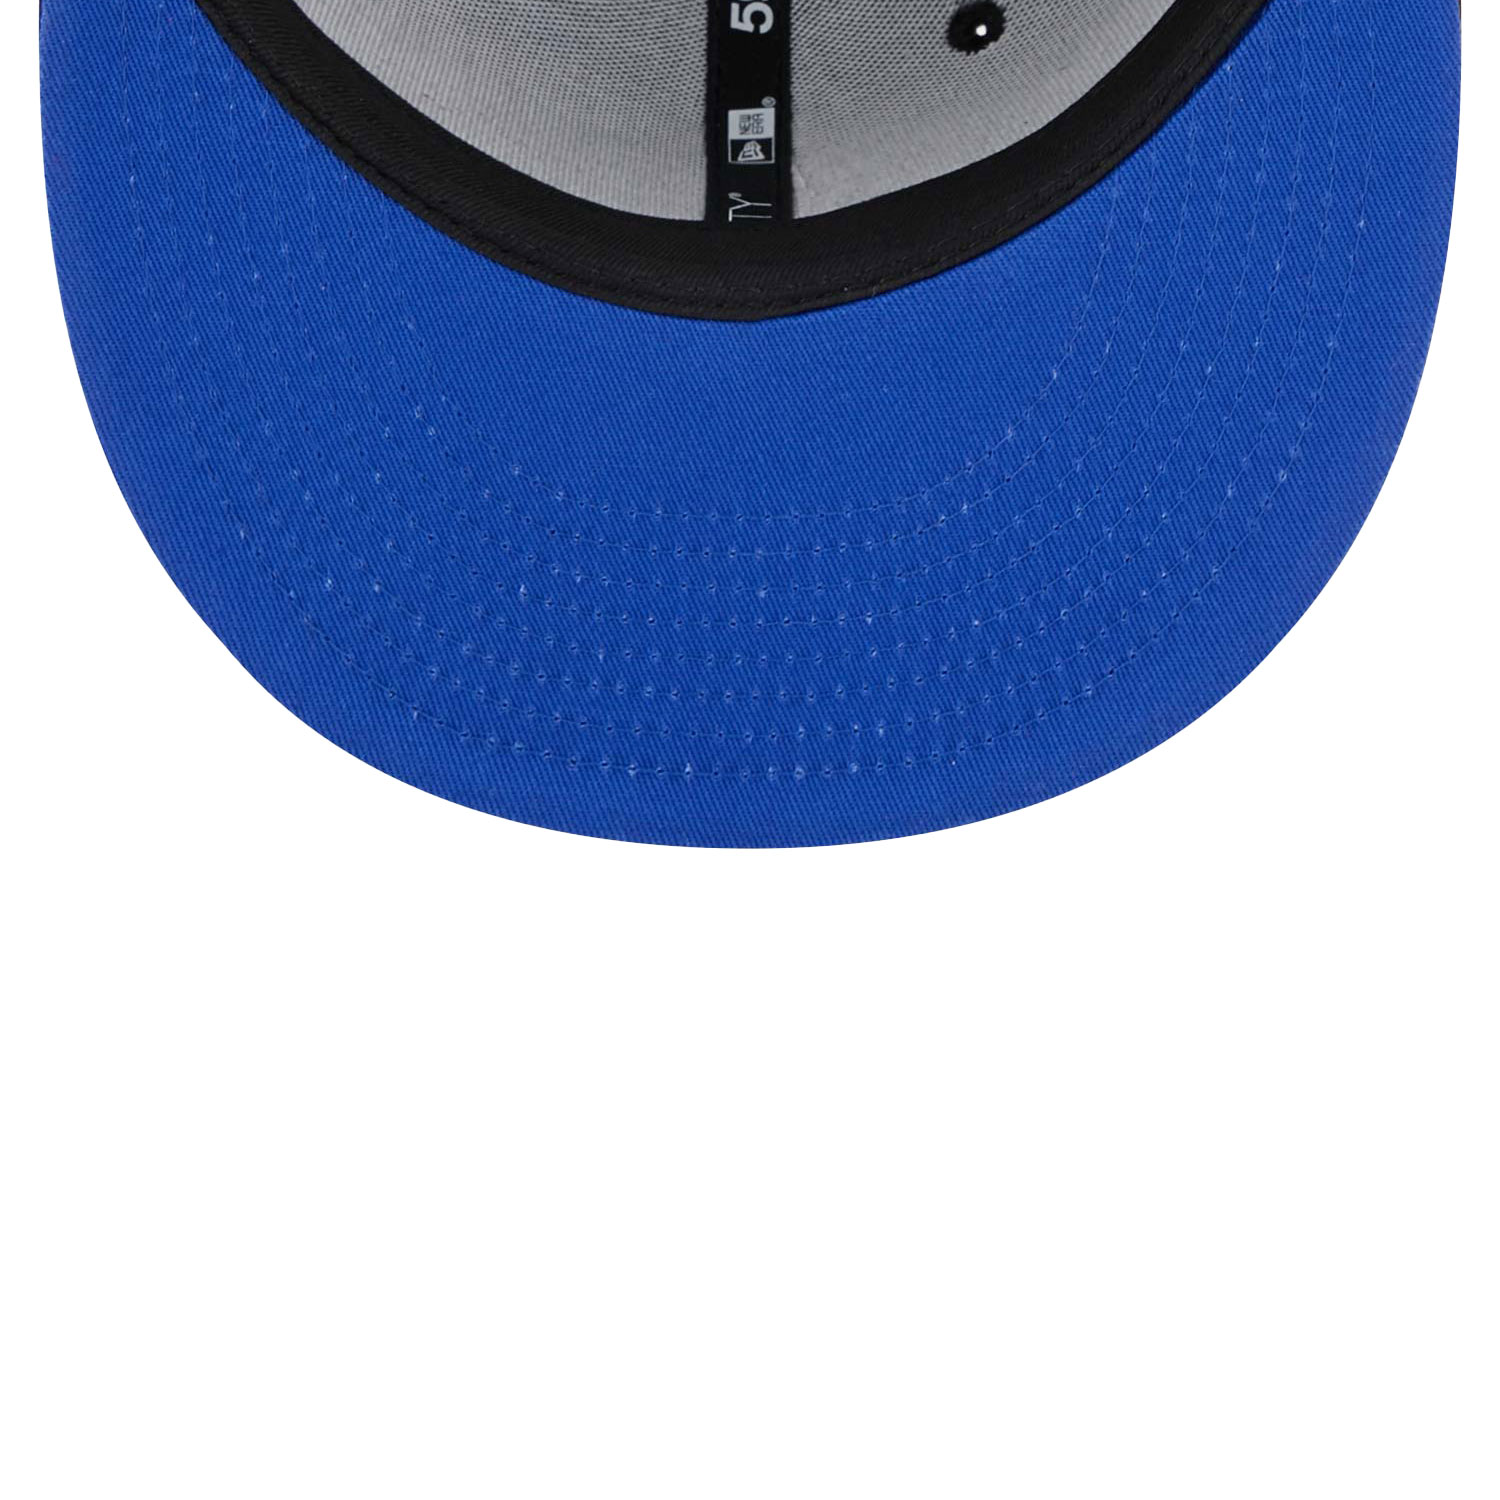 New York Knicks NBA Elements Black 59FIFTY Fitted Cap